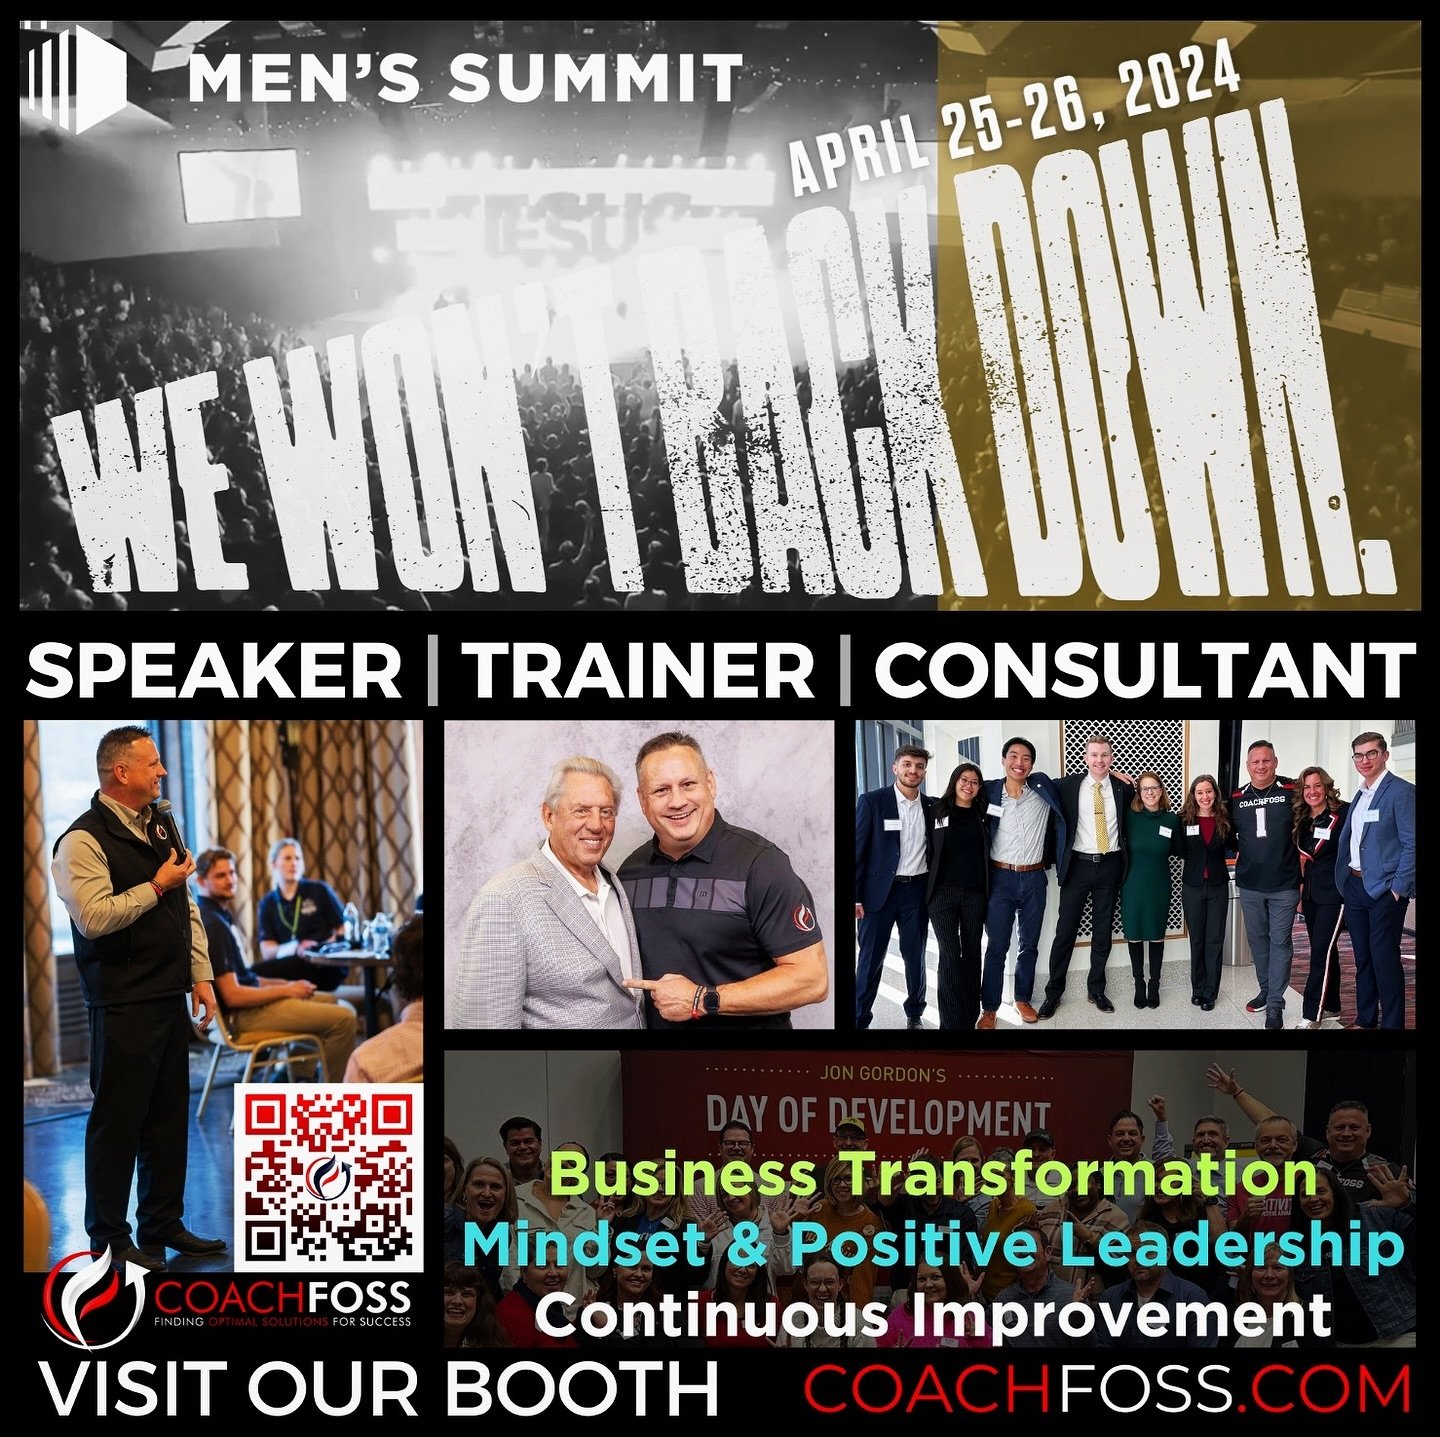 I am super excited to announce that CoachFoss LLC is returning to sponsor a BOOTH at the 2024 Men&rsquo;s Summit in Southlake, TX!!!

https://www.menssummit.com

COME SEE US!!!
April 25-26

You have been called to maximize your God given potential to